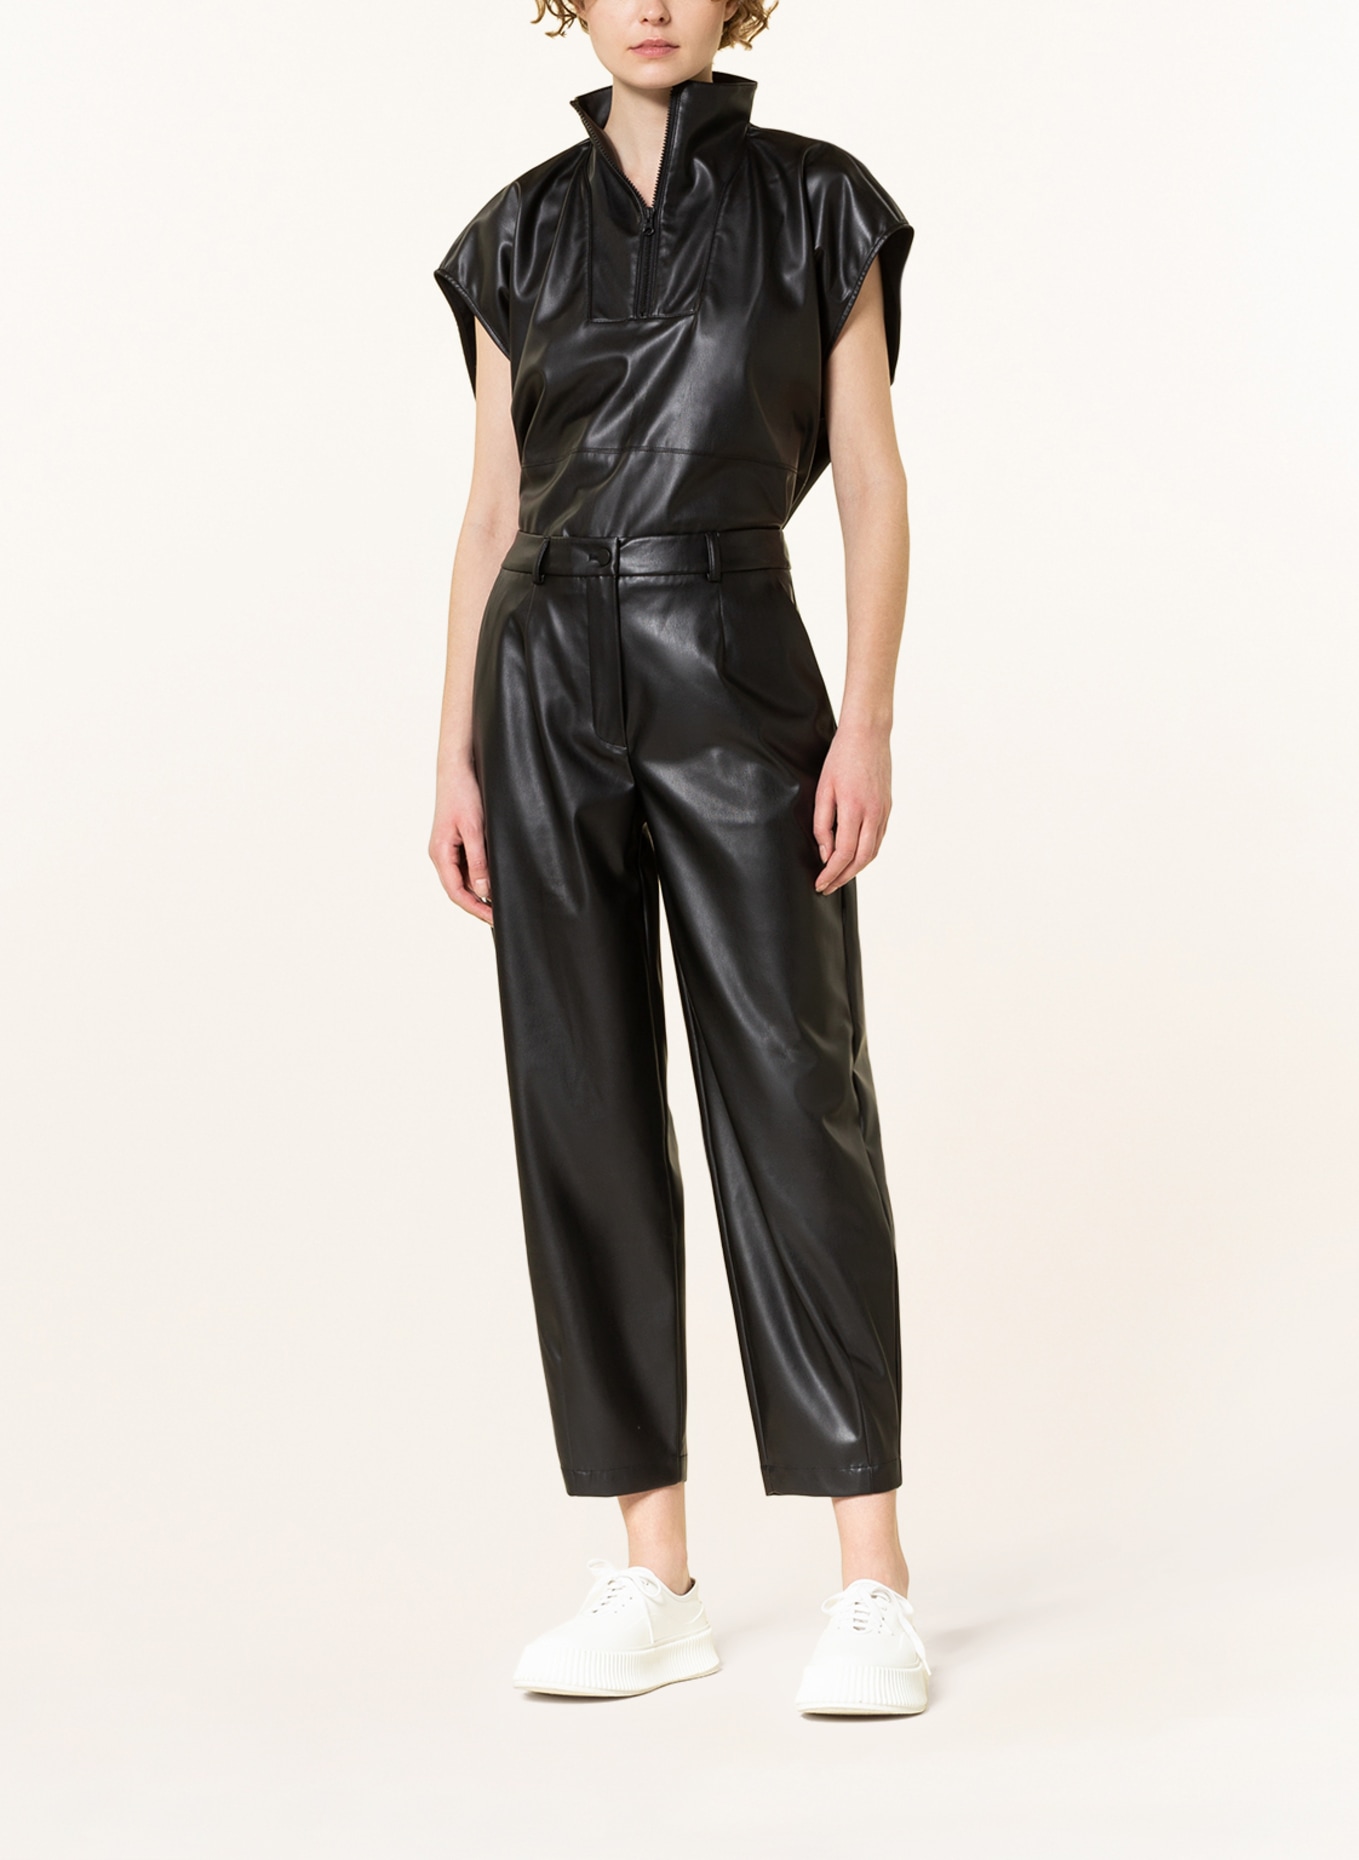 KARO KAUER 7/8 trousers in leather look, Color: BLACK (Image 2)